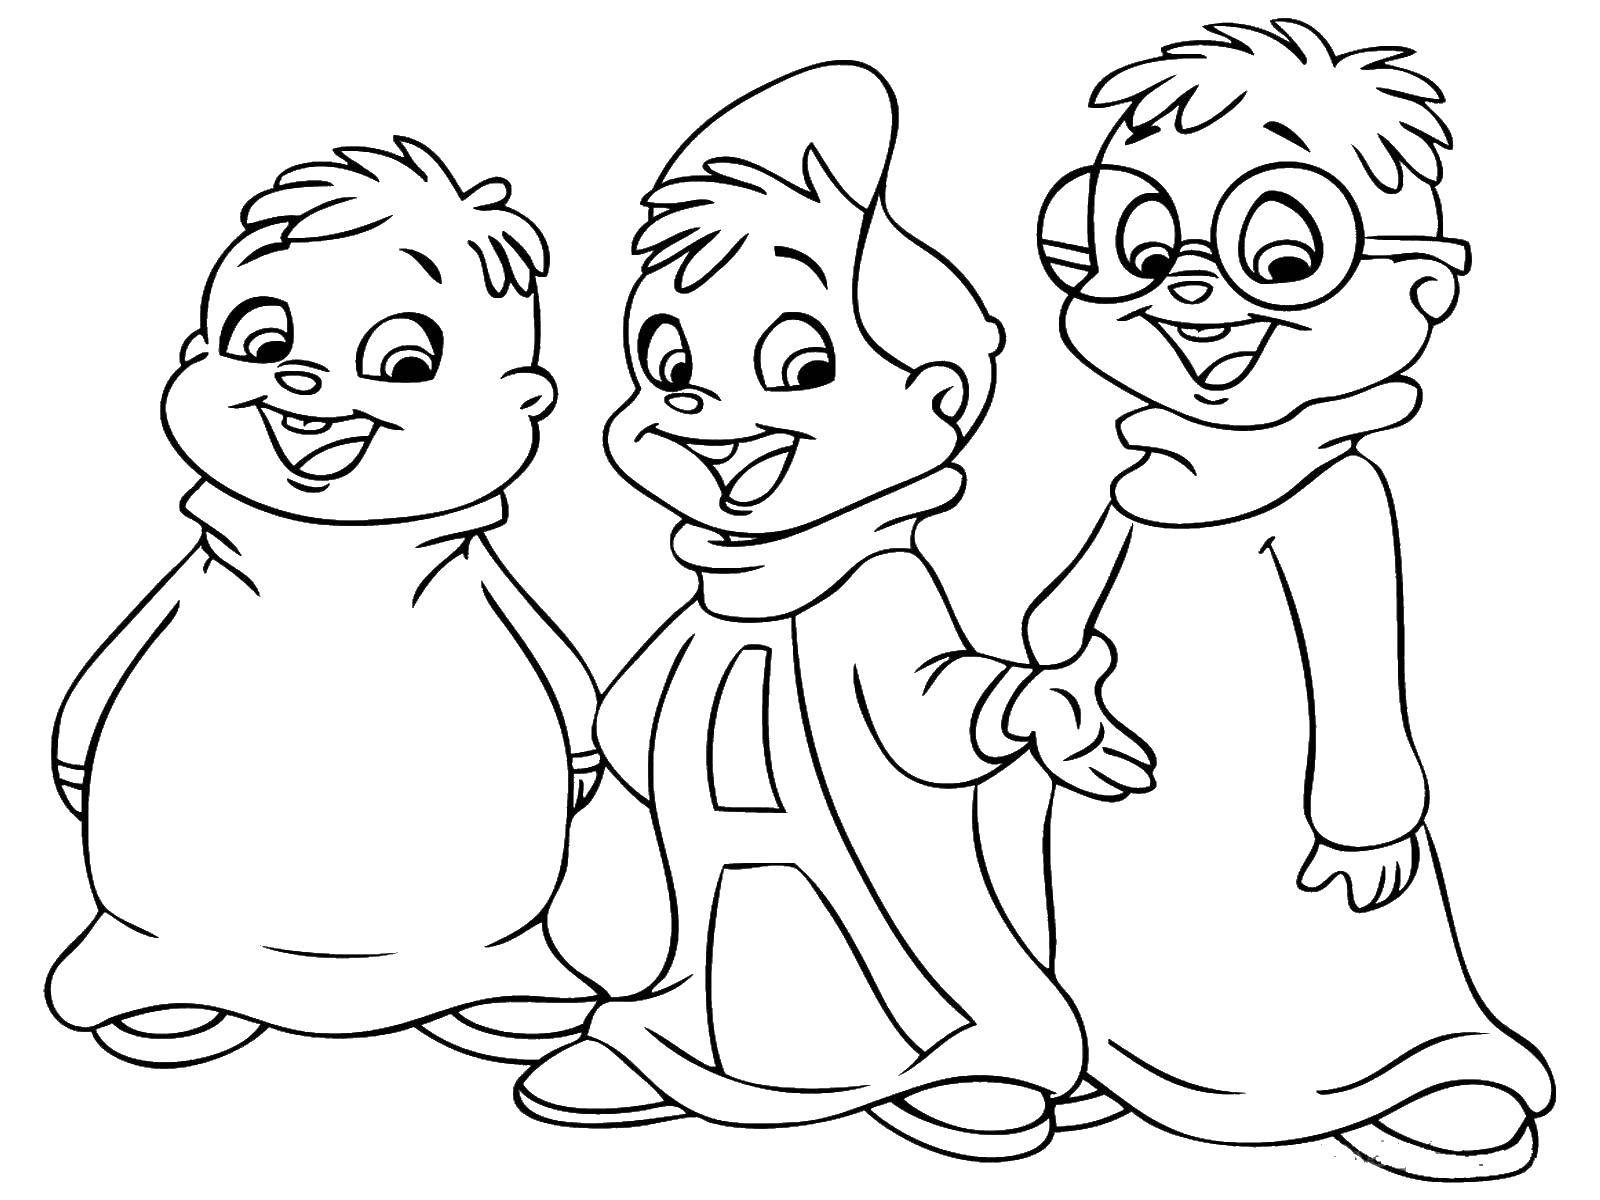 Coloring Alvin and the chipmunks. Category cartoons. Tags:  Alvin, chipmunks.